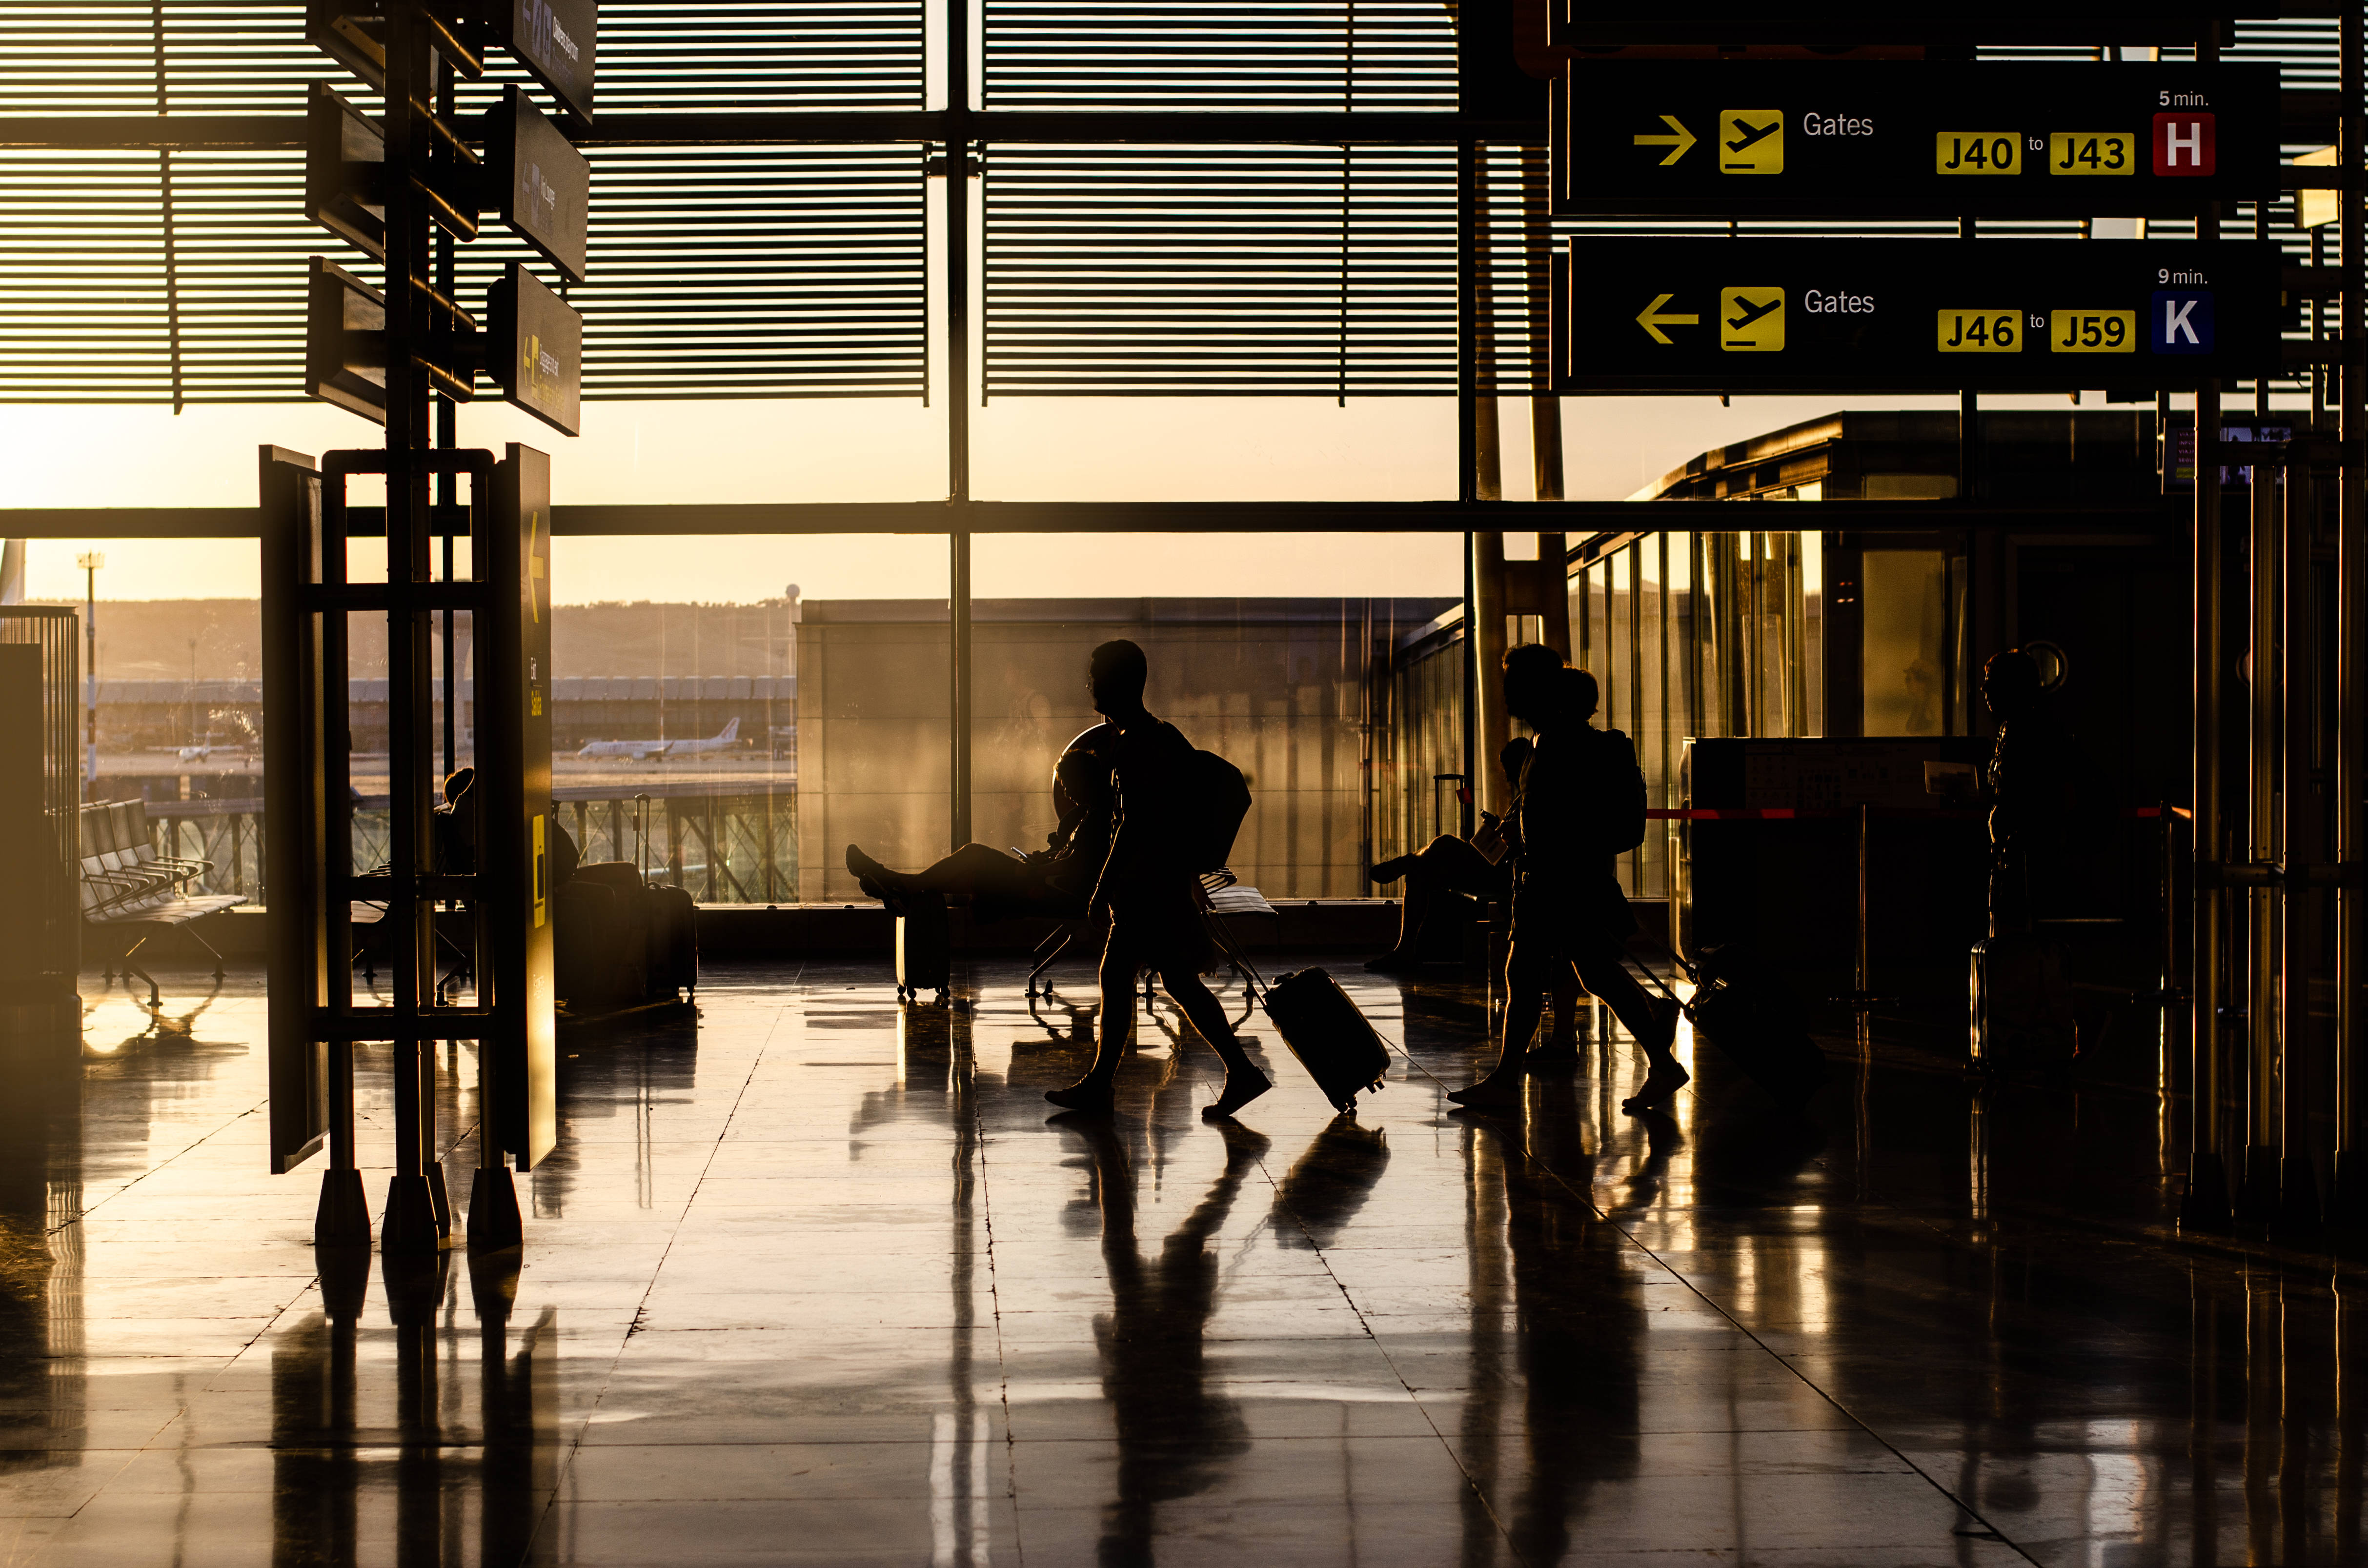 People walking inside a modern airport terminal, with large windows and natural light.